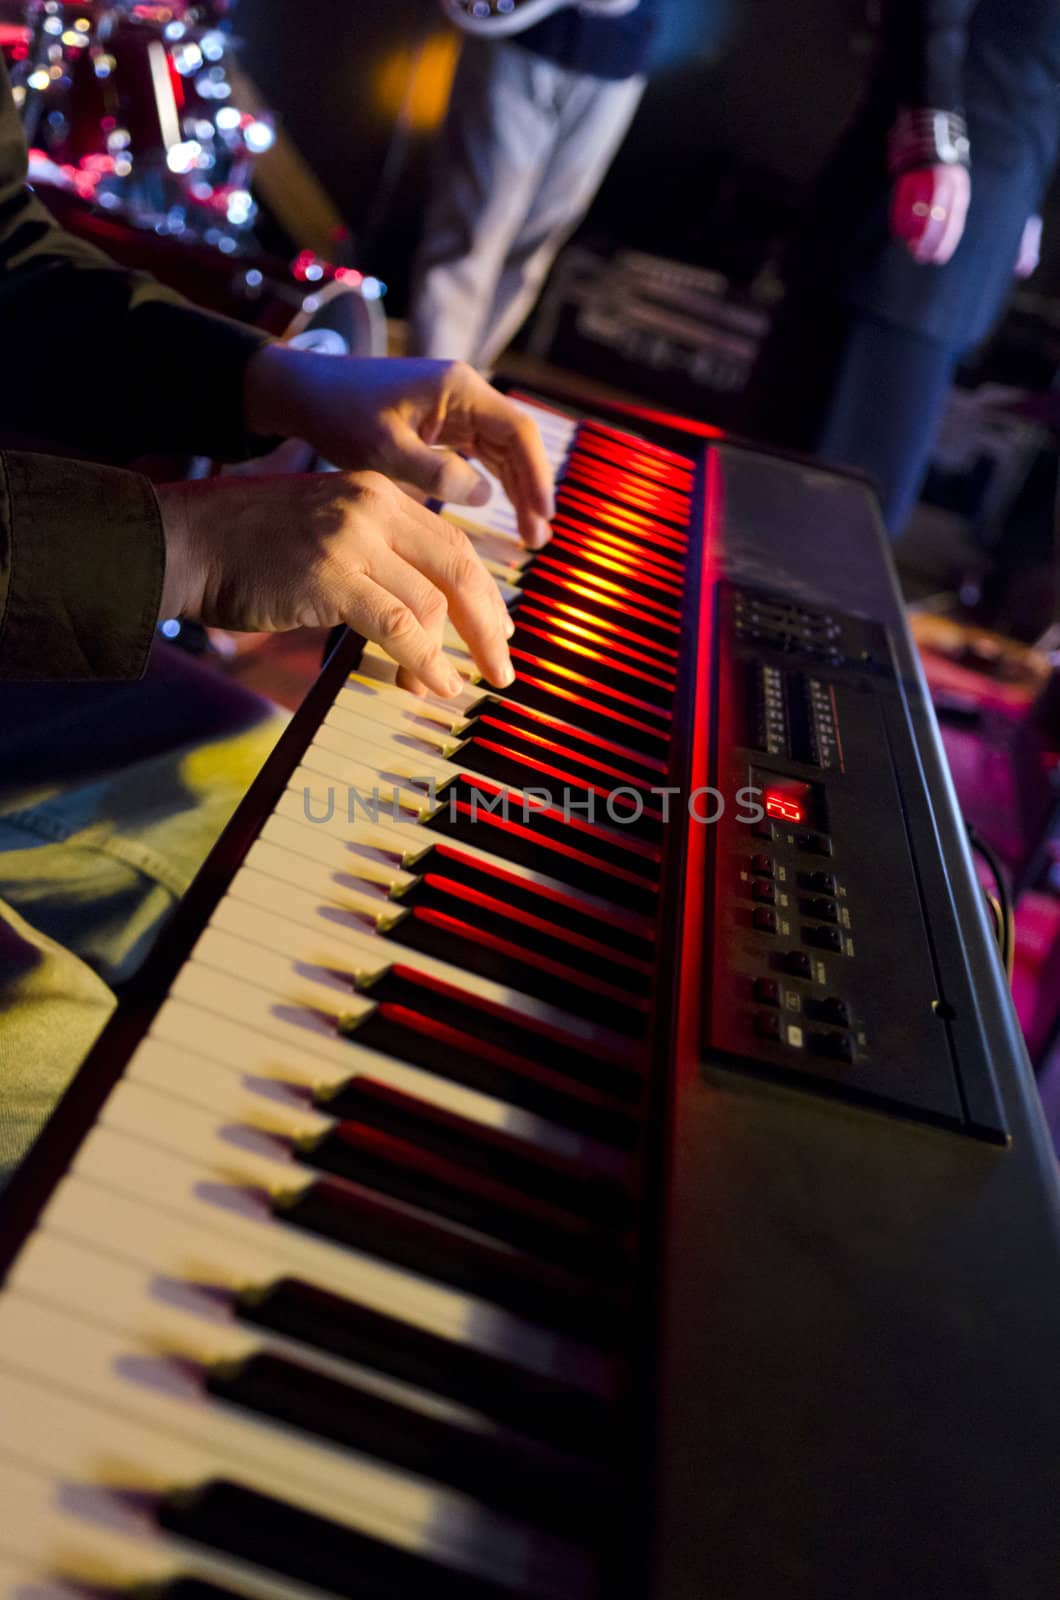 Selective focus on the hands on the keyboard at a blues festival